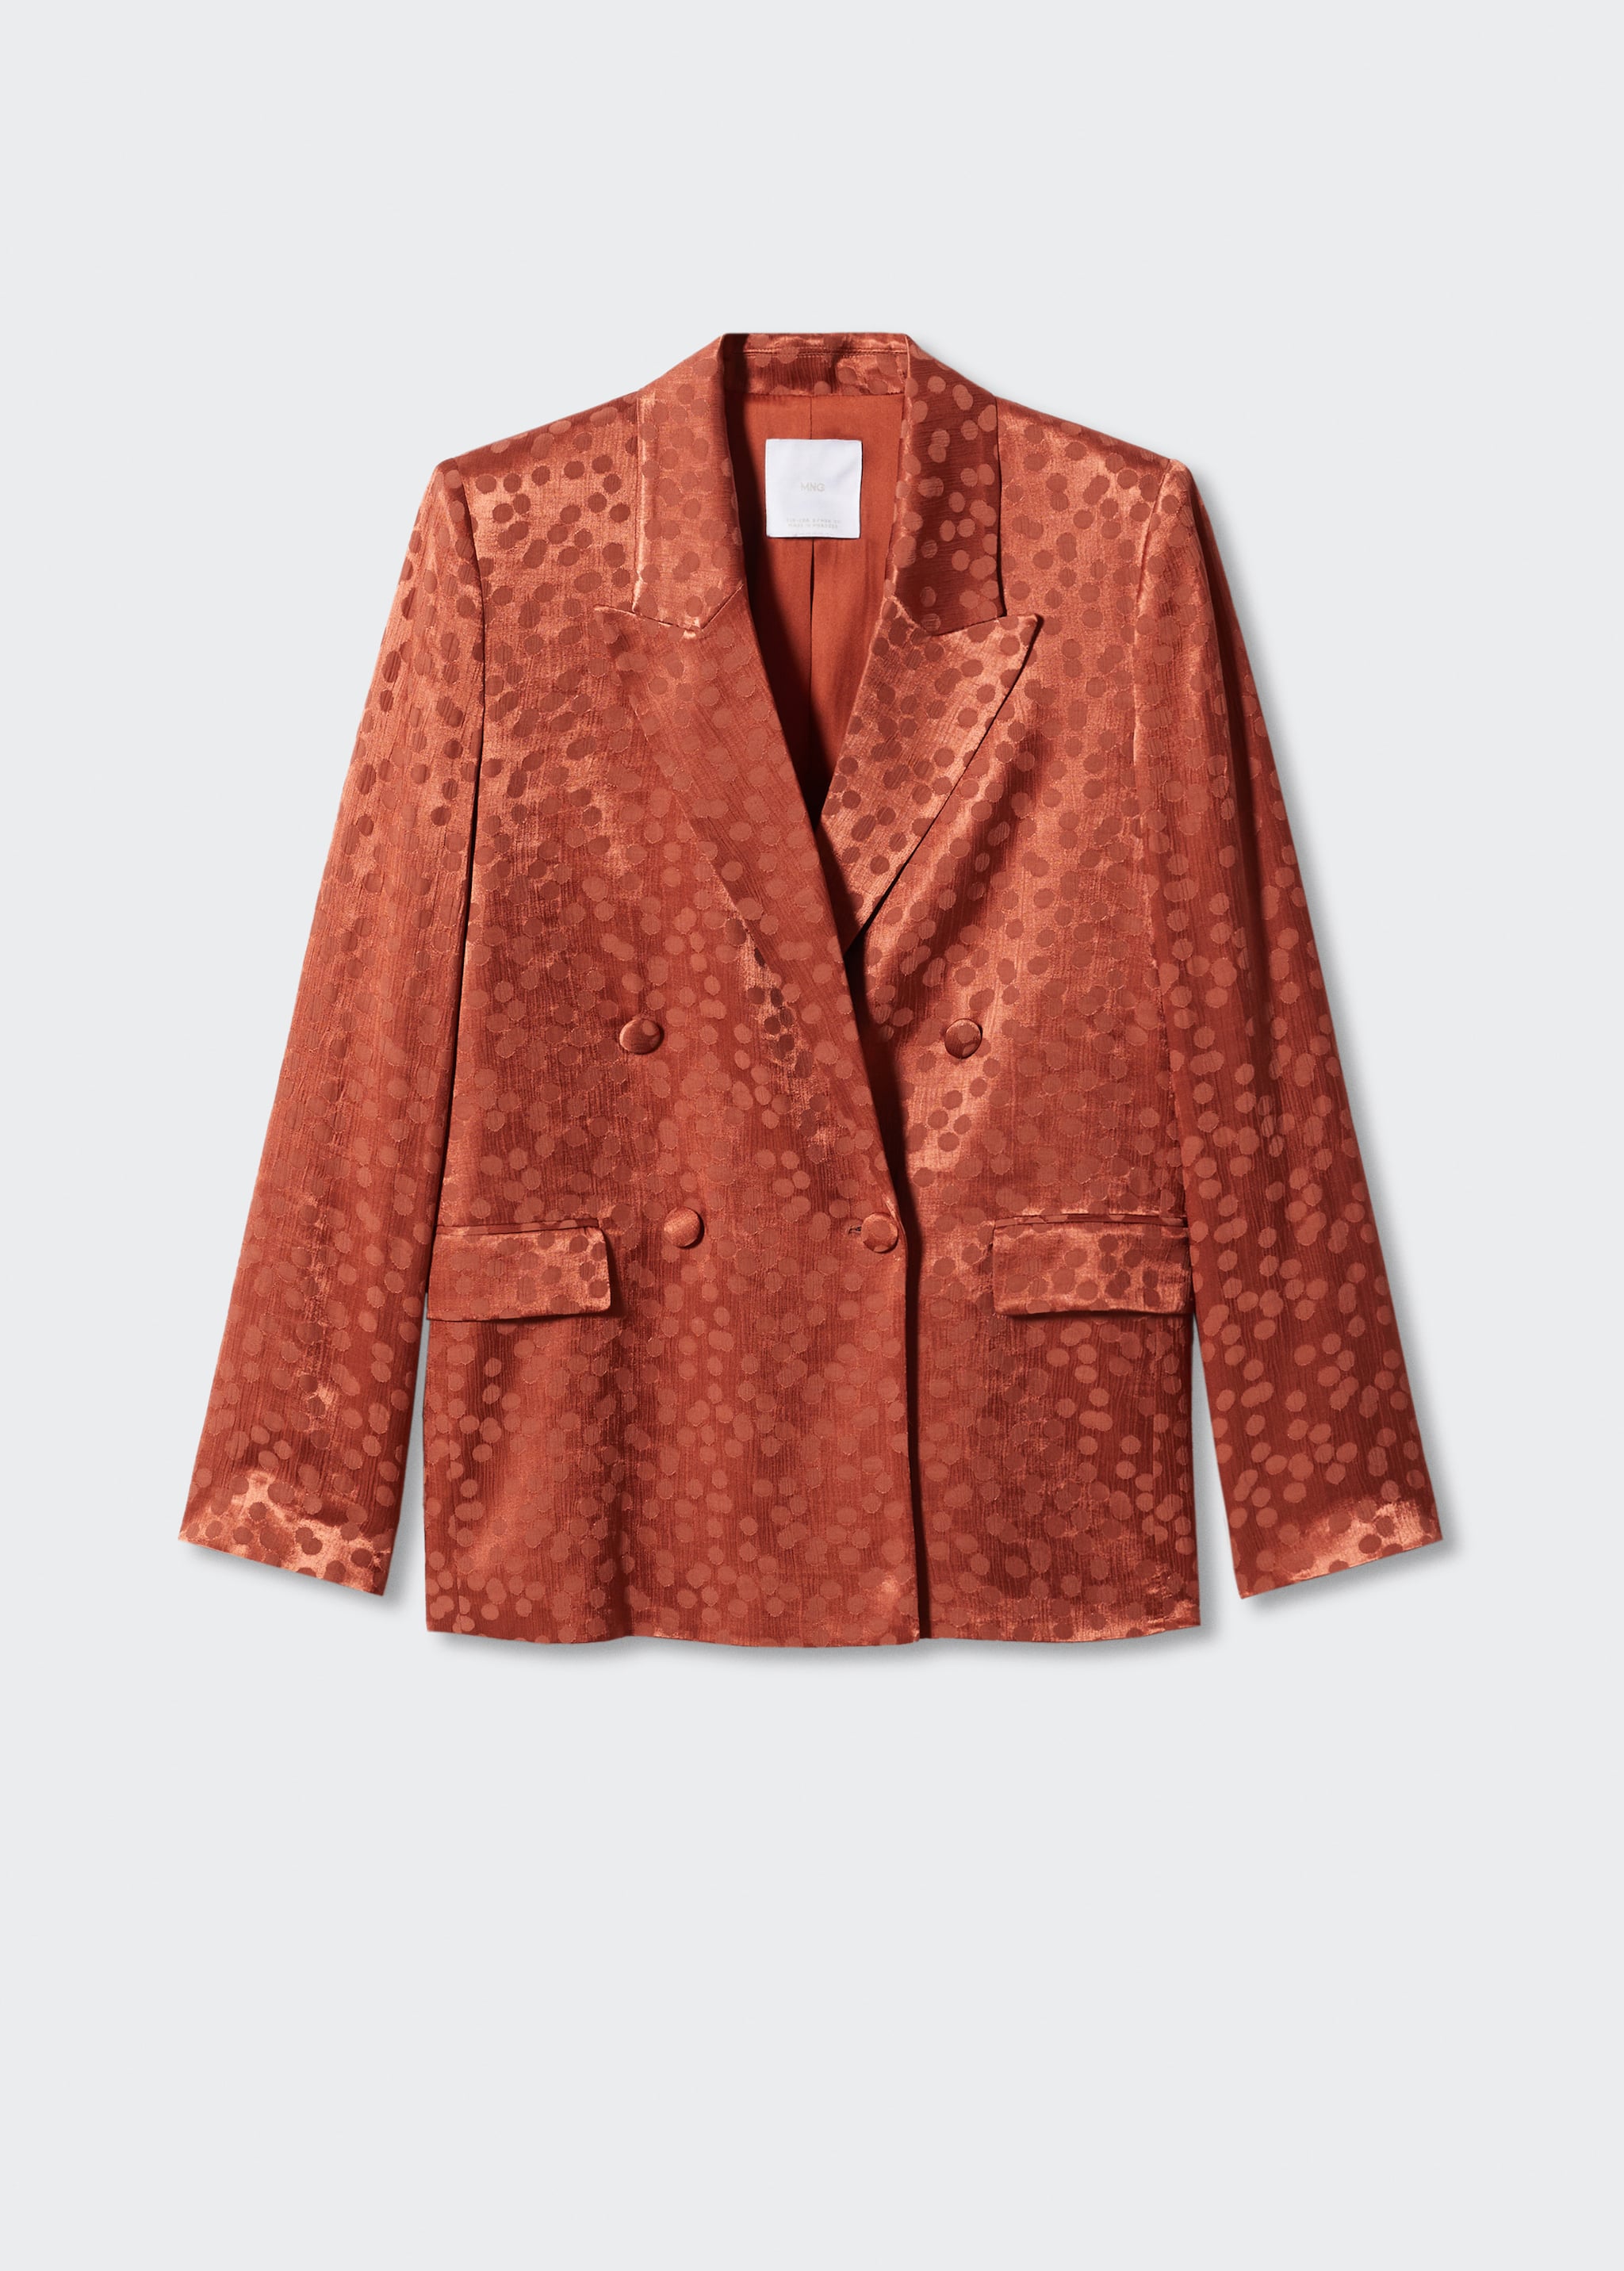 Satin printed blazer - Article without model